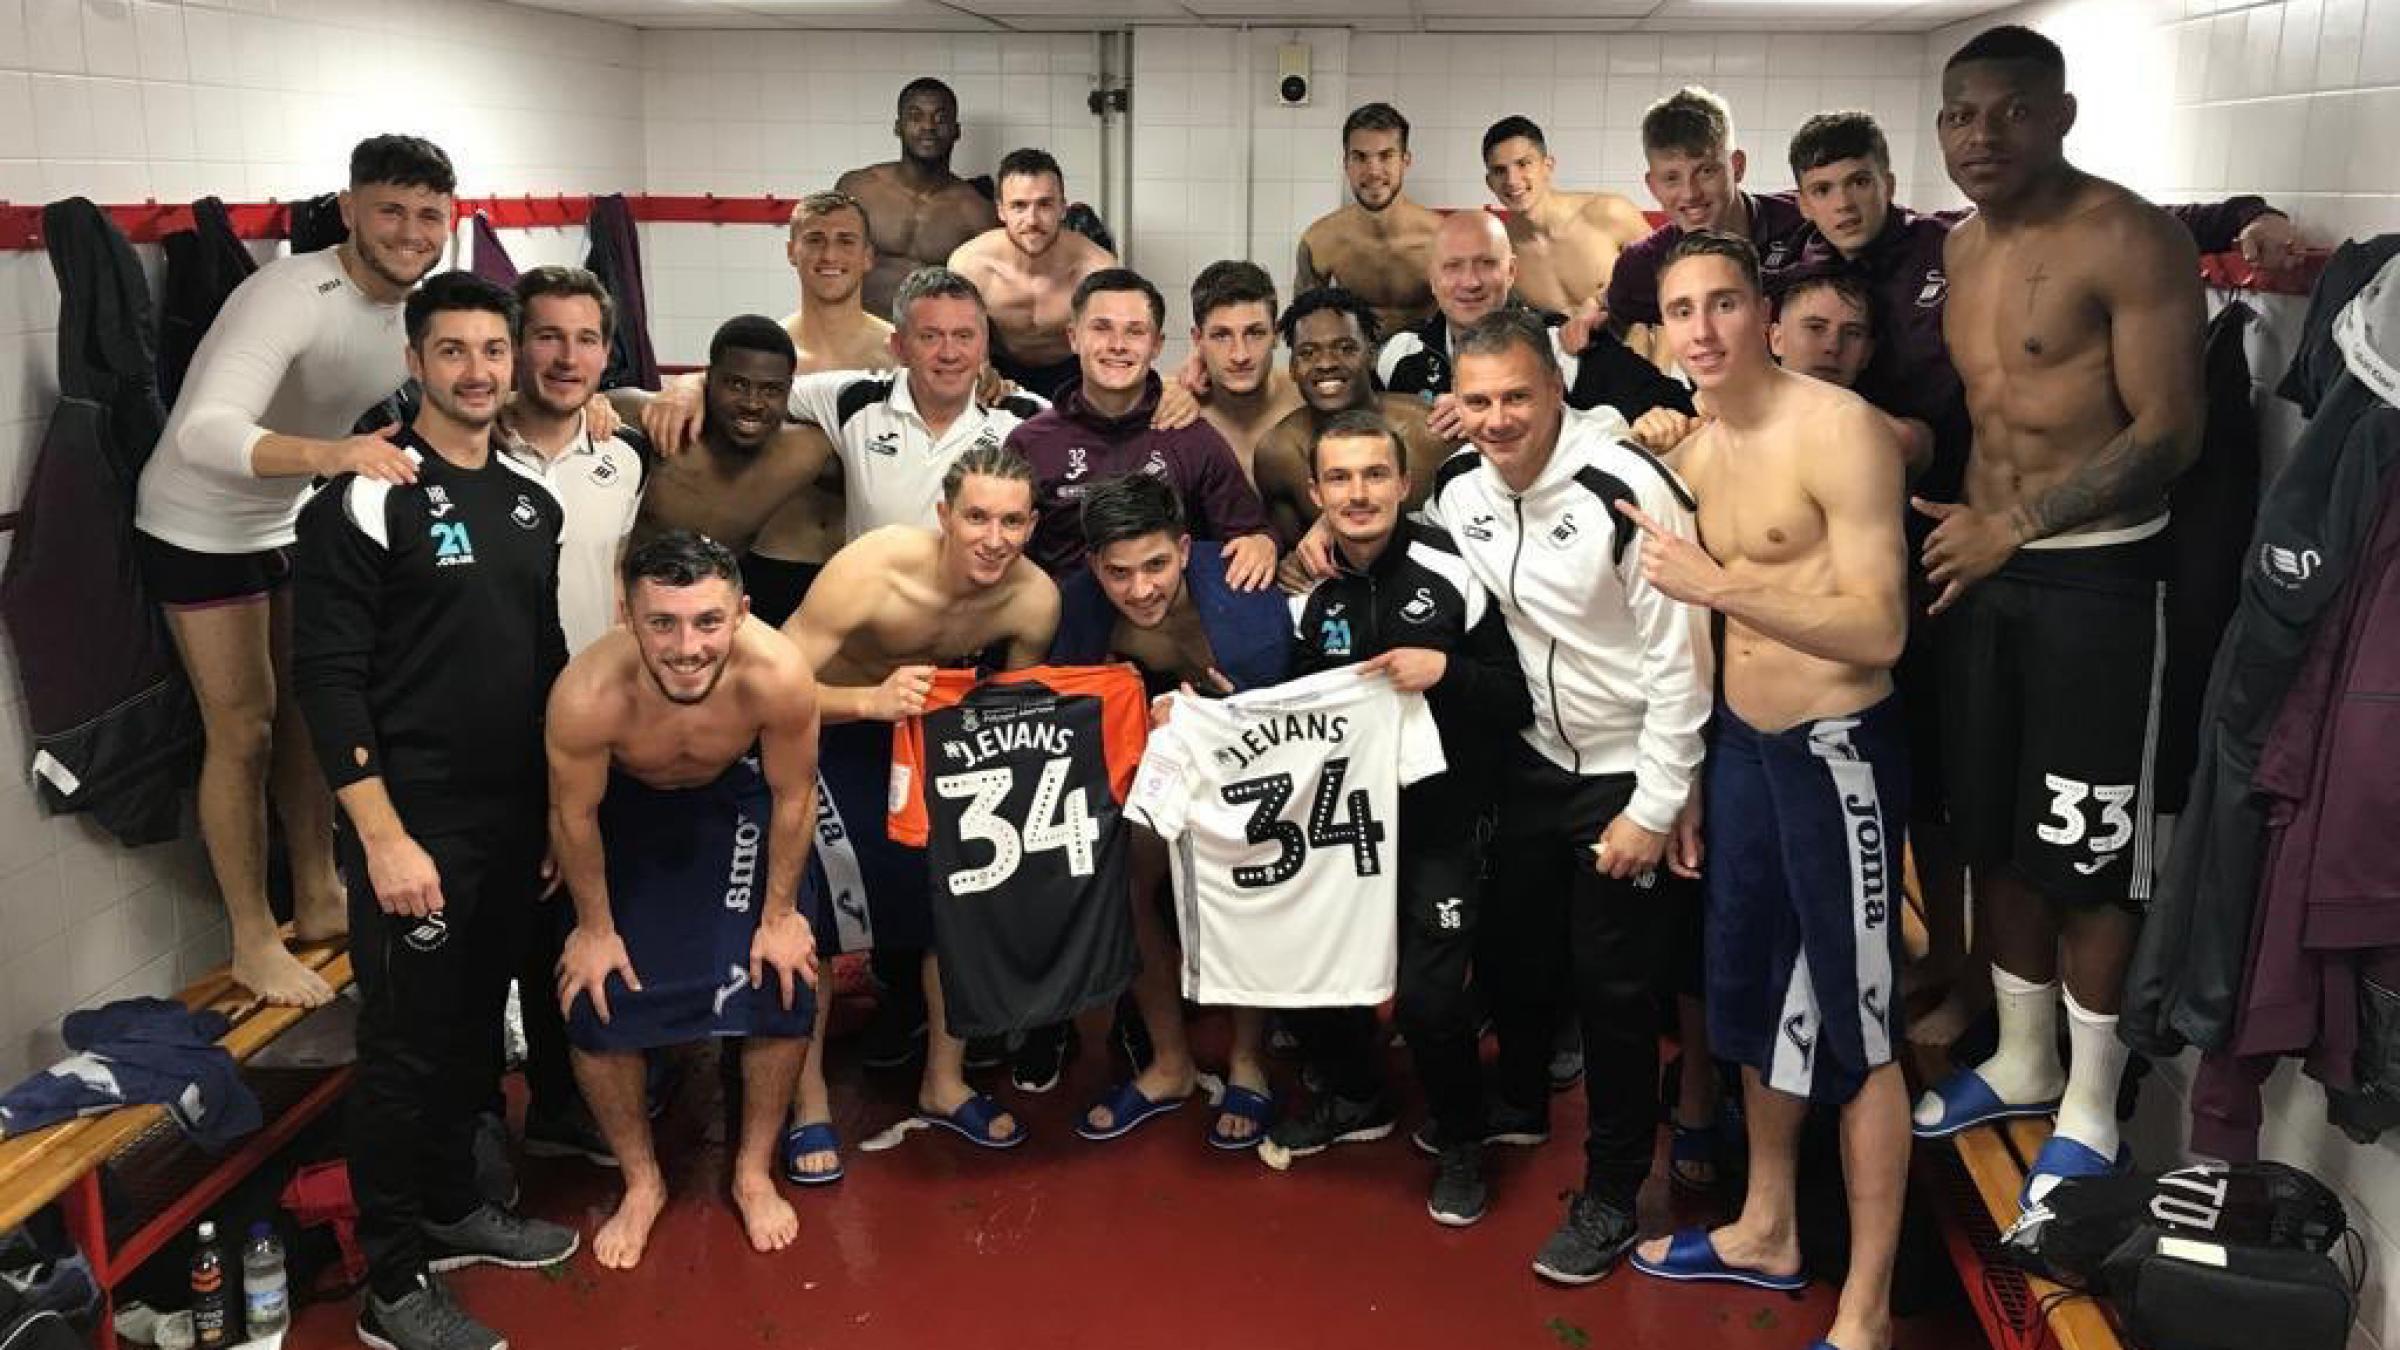 The Swans Under-23s team show their support to team-mate Jack Evans.